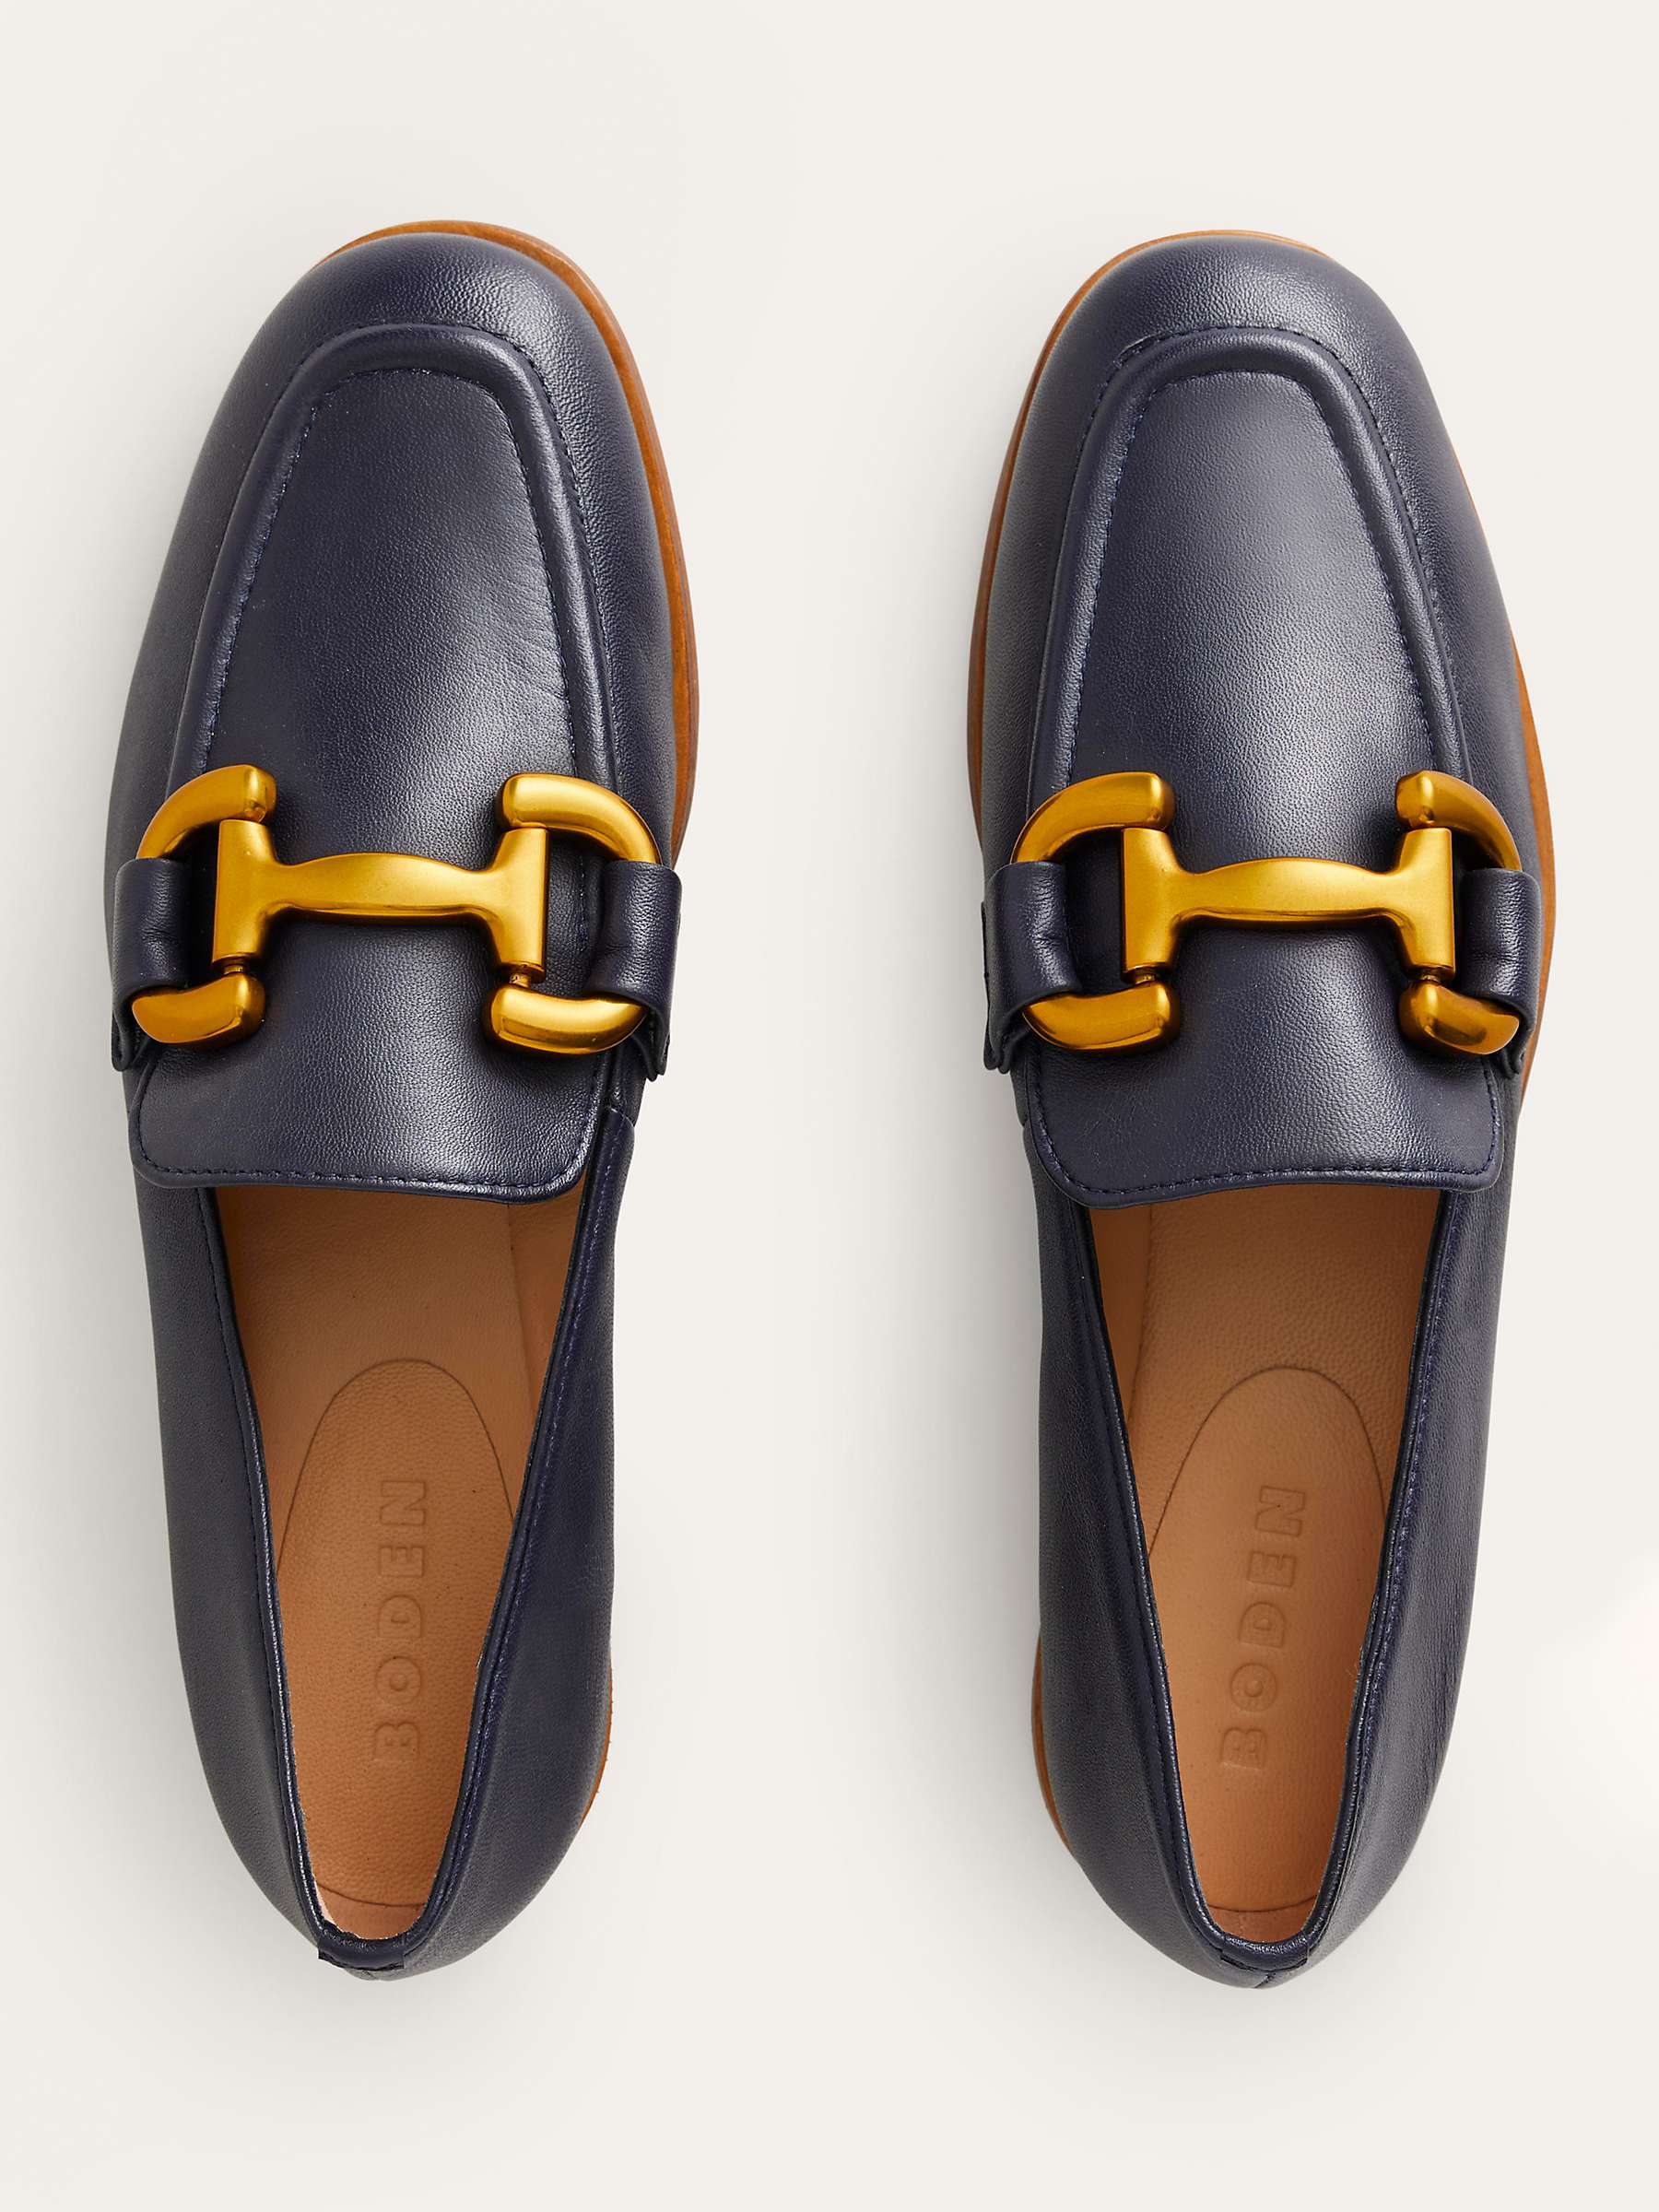 Buy Boden Iris Leather Snaffle Trim Loafers Online at johnlewis.com